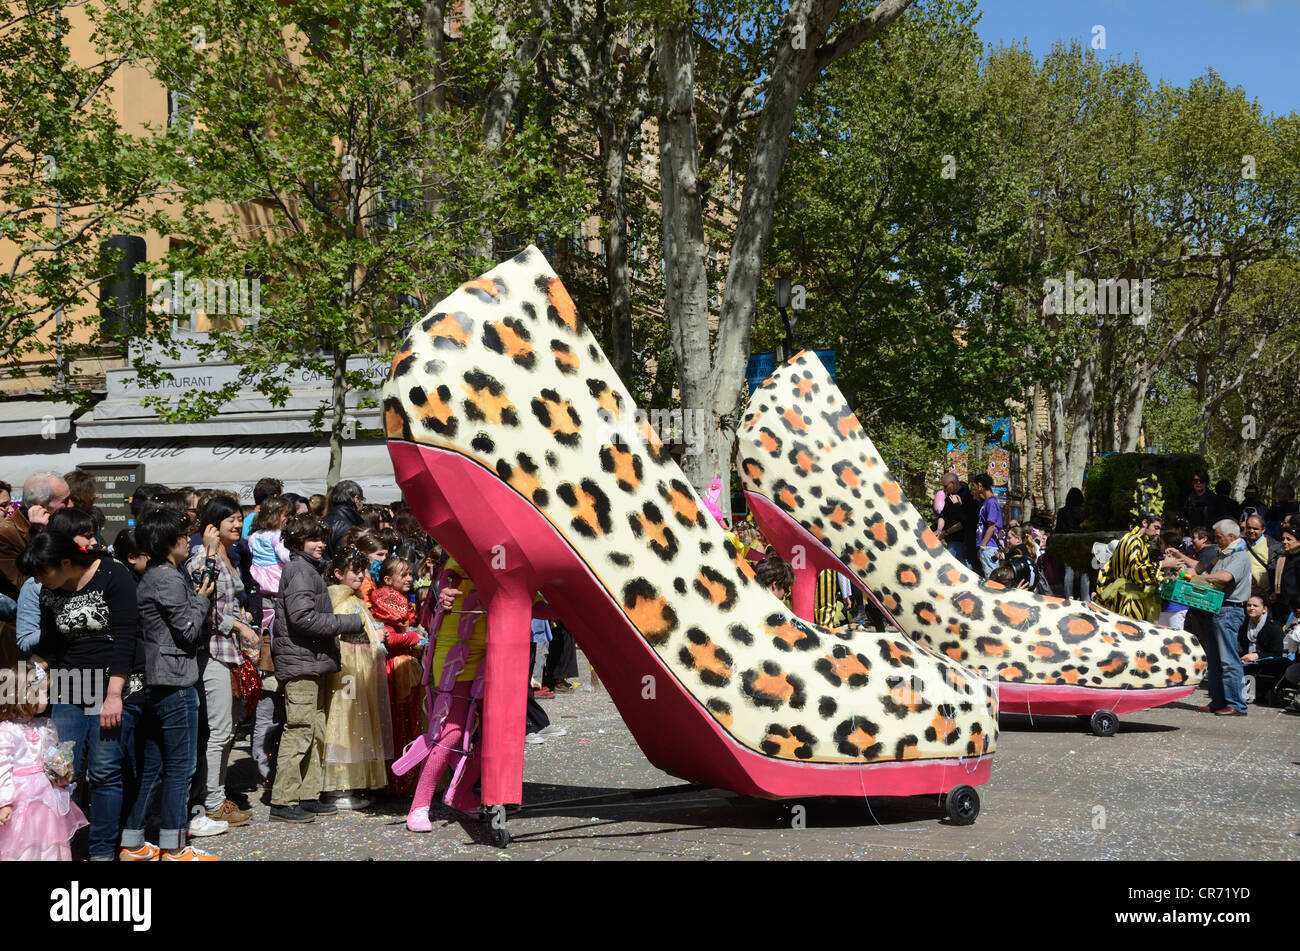 Custom Cars, Soapbox Cars, Comic Carts or Giant Shoe Cars in Shape of High-Heel Shoes Spring Carnival Cours Mirabeau Aix-en-Provence Provence France Stock Photo